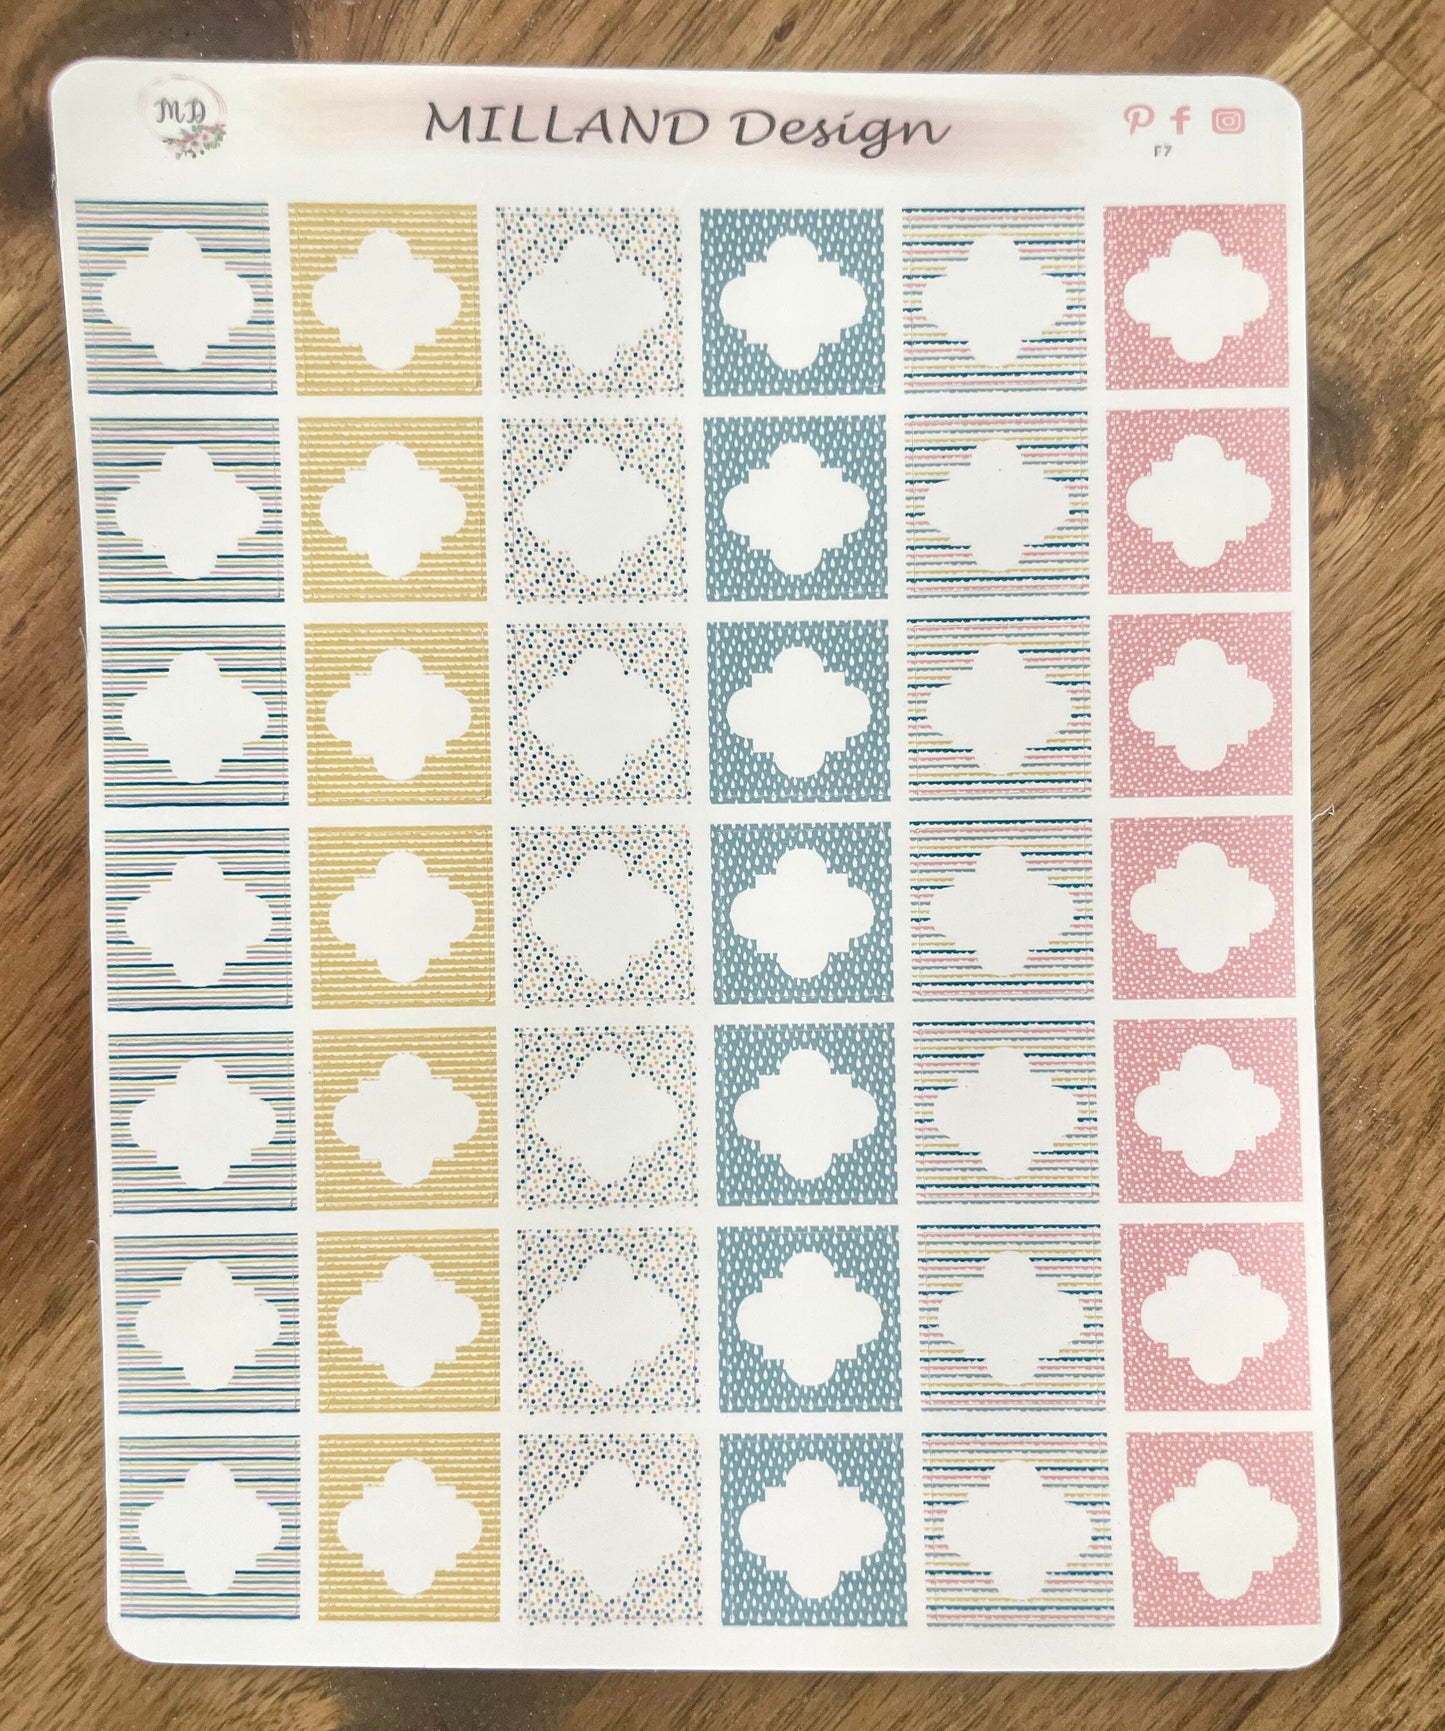 Daily or weekly money tracker for planners